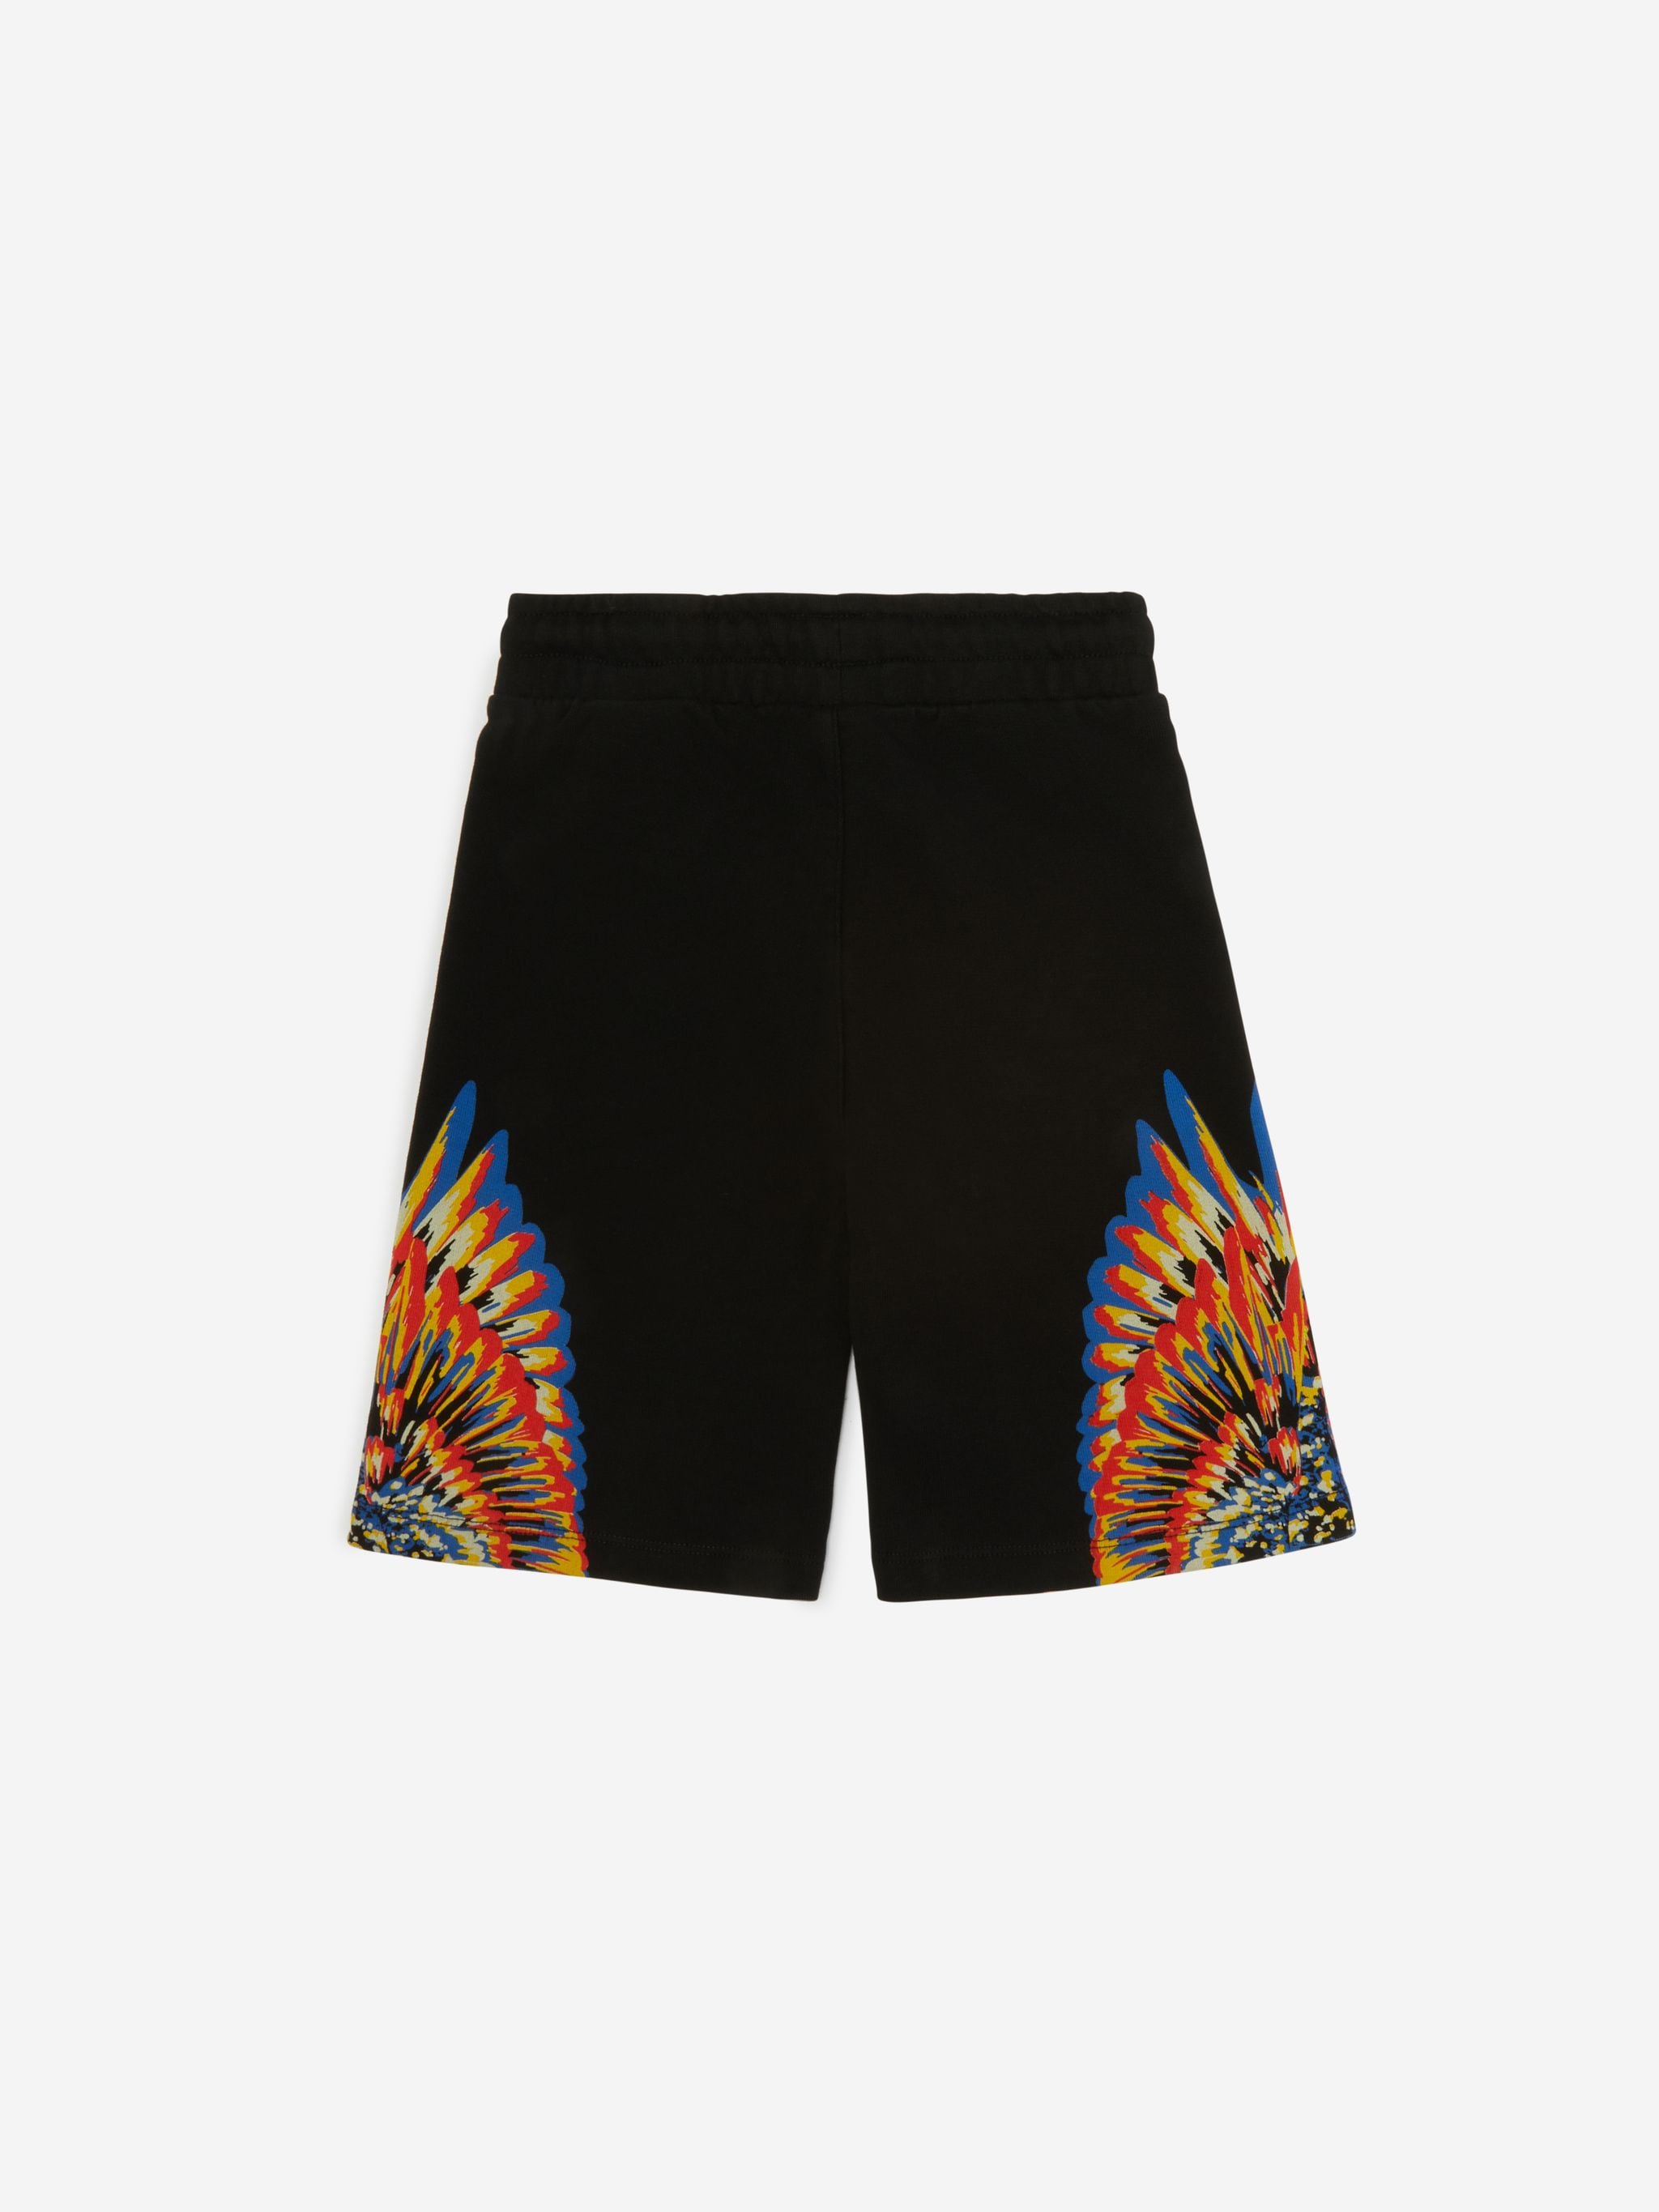 Black cotton Tempera Wings printed shorts from Marcelo Burlon Kids featuring signature Marcelo Burlon Wings print, elasticated waistband, drawstring fastening, two side inset pockets and straight leg.